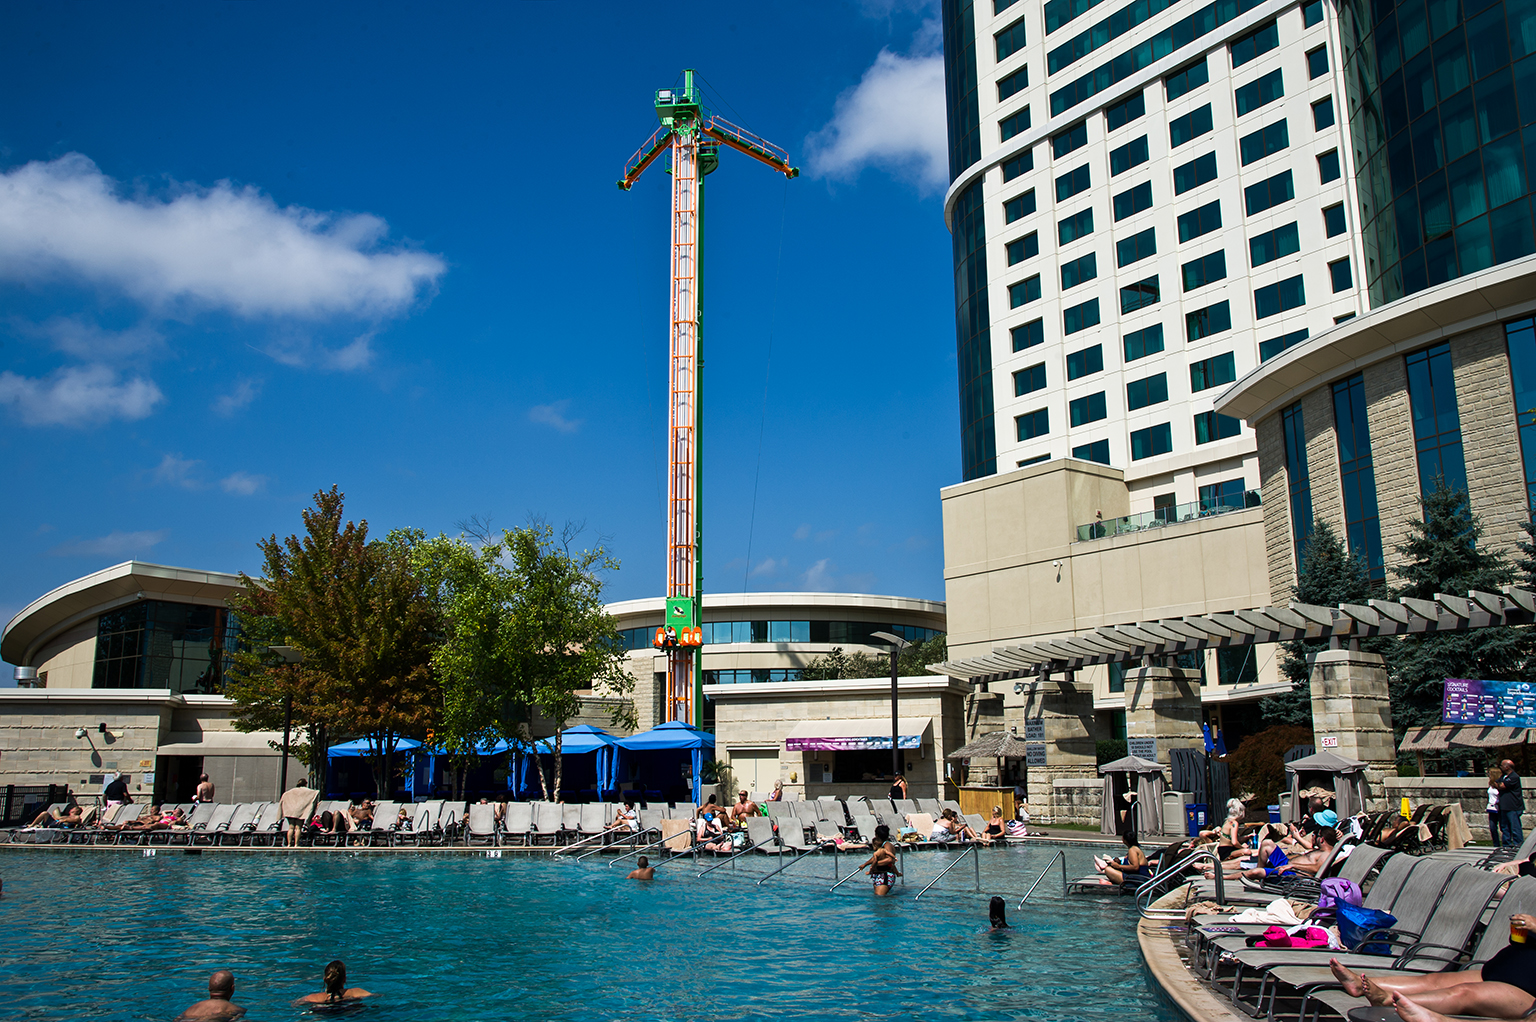 The Thrill Tower Opens at Foxwoods Resort Casino